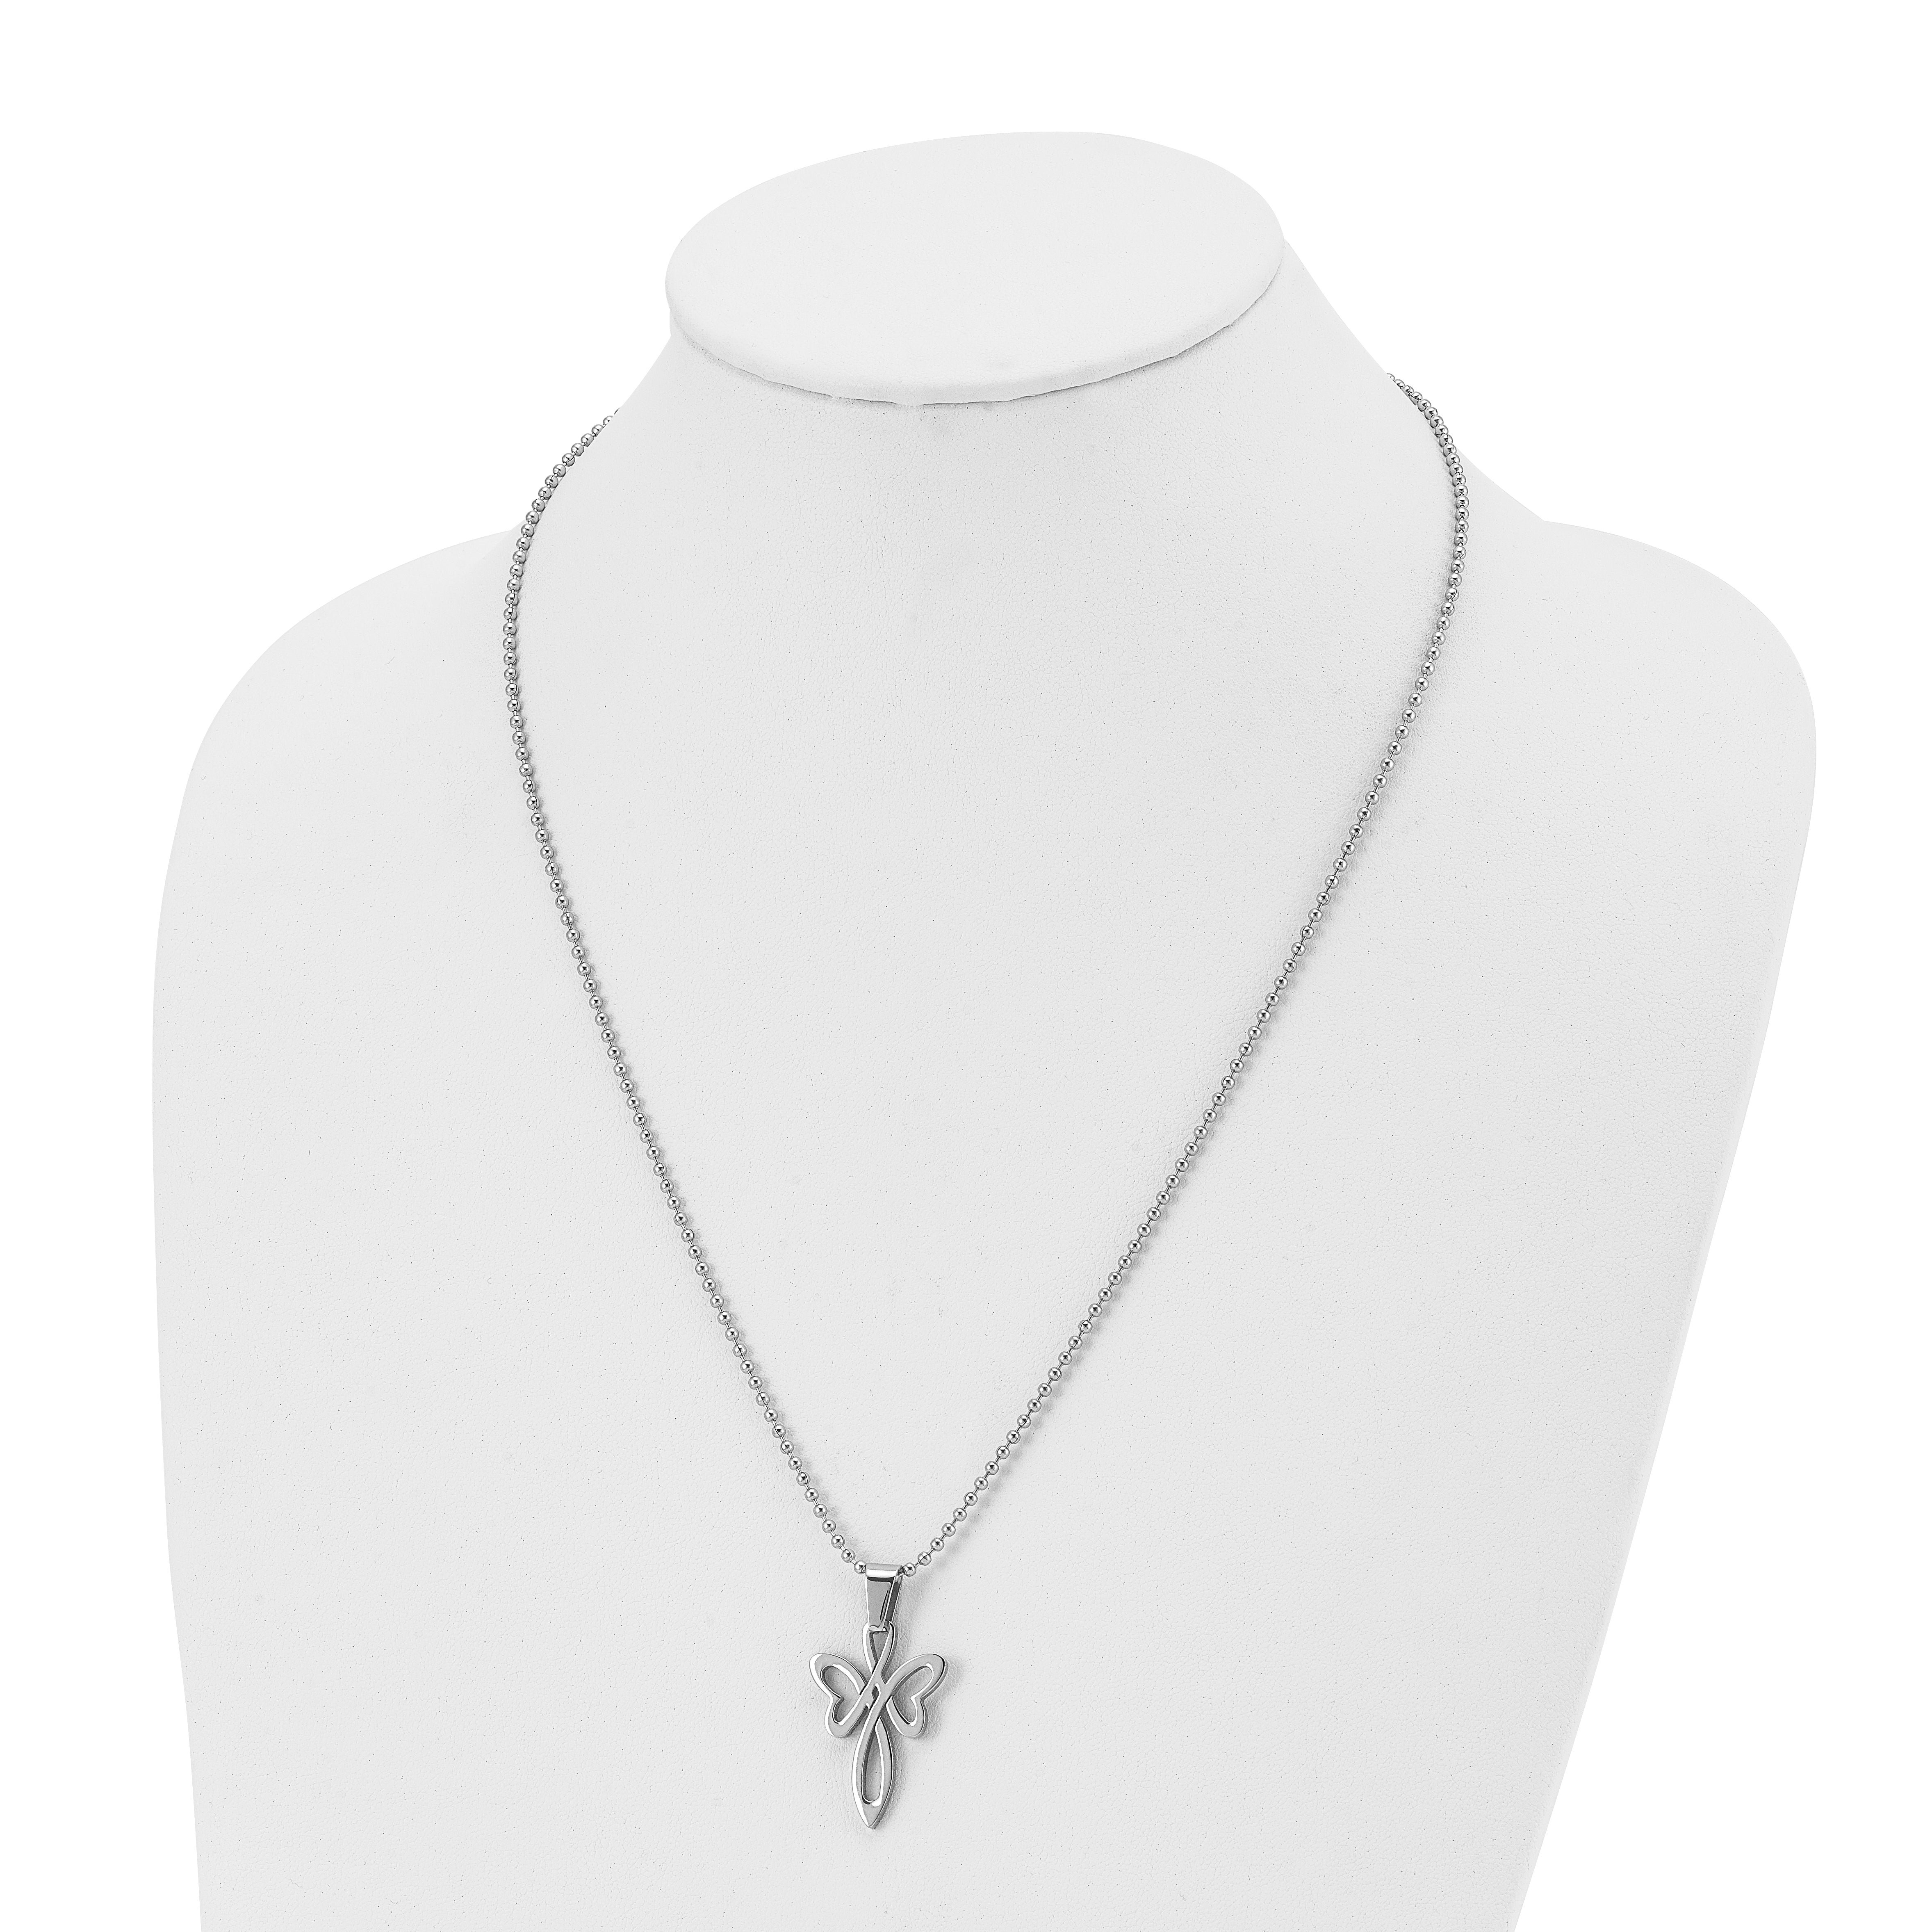 Chisel Stainless Steel Polished Fancy Cross Pendant on a 22 inch Ball Chain Necklace